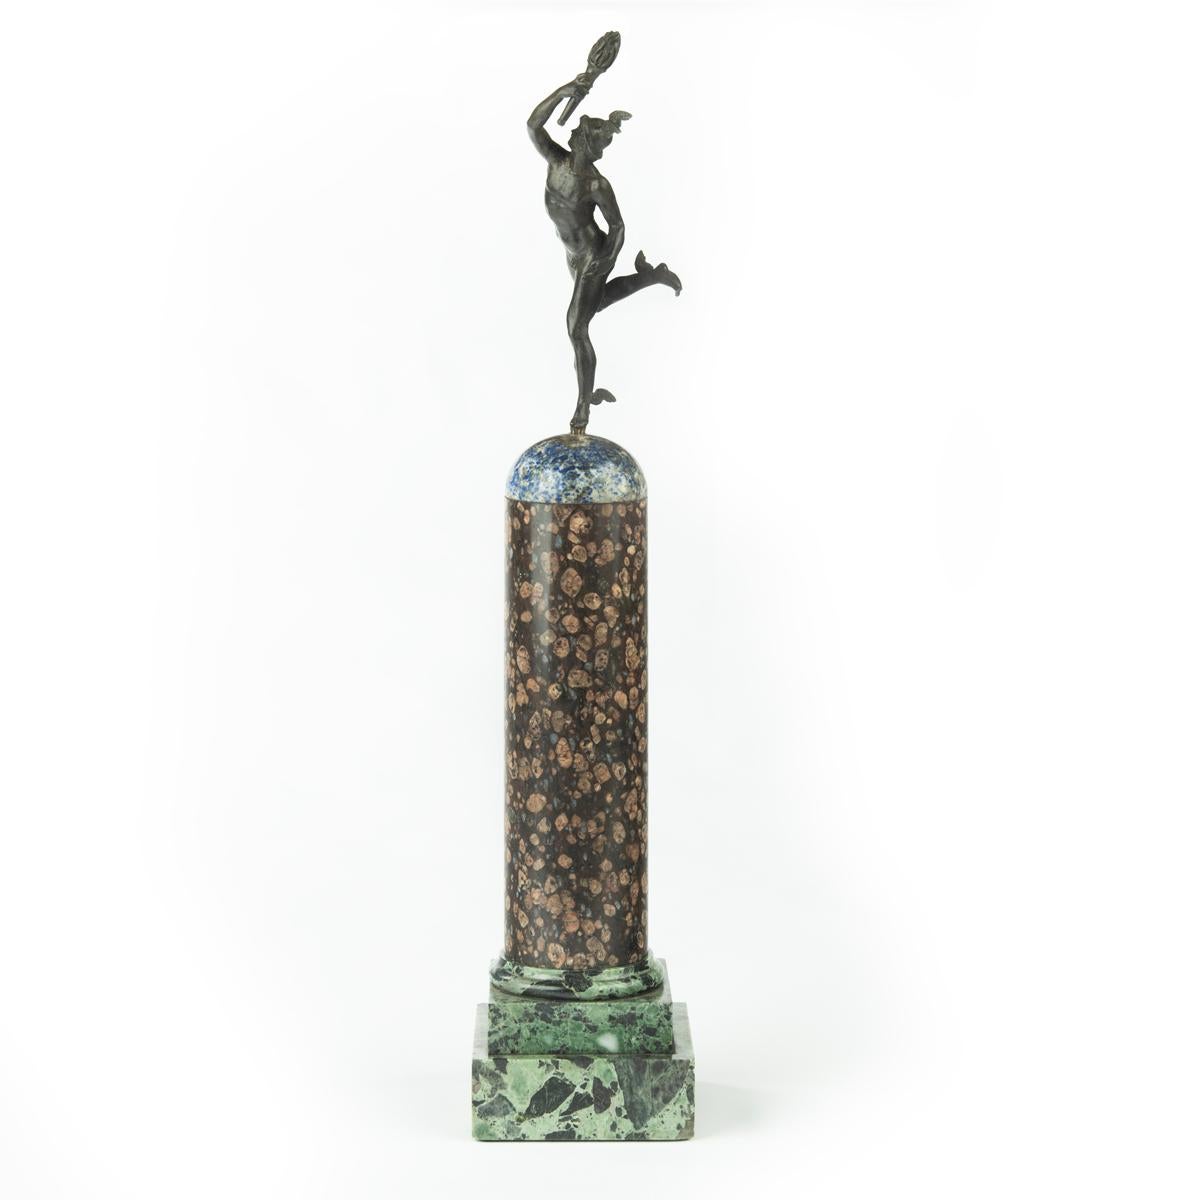 A Grand Tour Regency bronze figure of Mercury (Hermes) on a marble column In Good Condition For Sale In Lymington, Hampshire